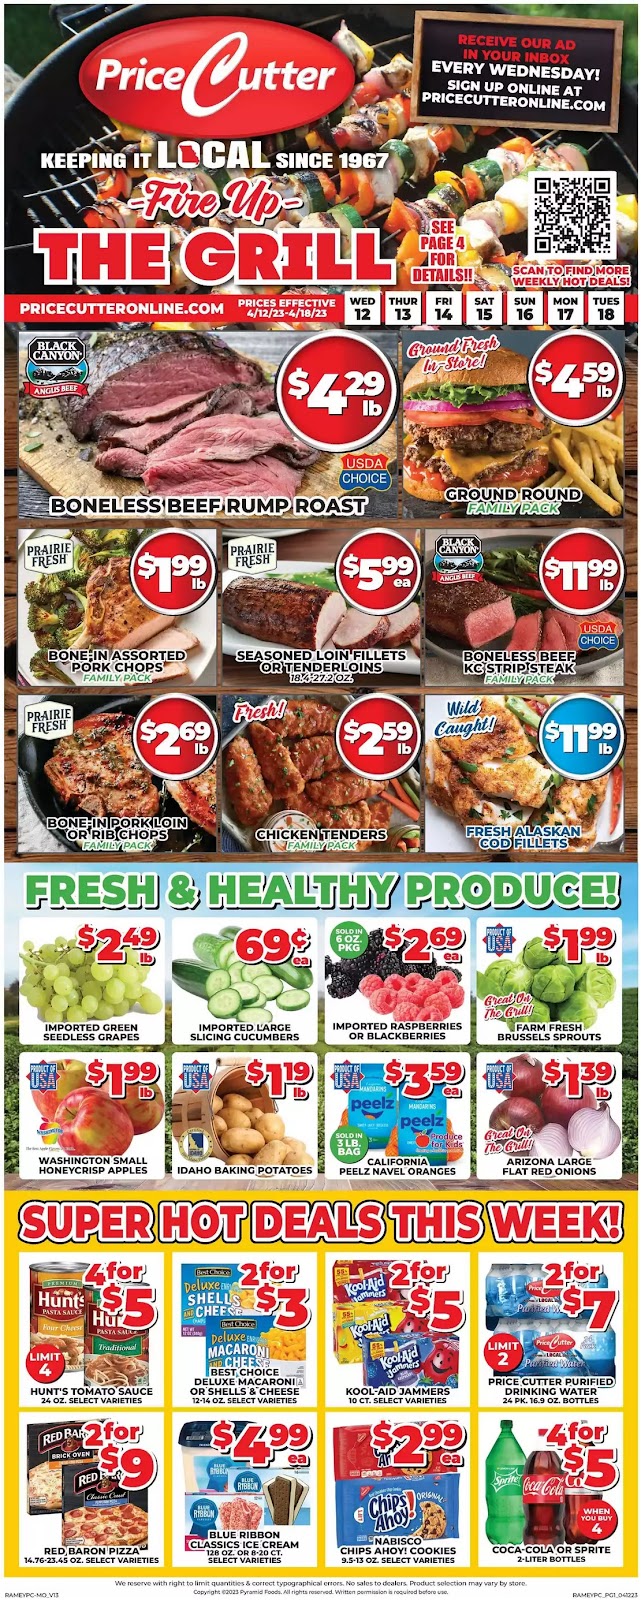 Price Cutter Weekly Ad - 1